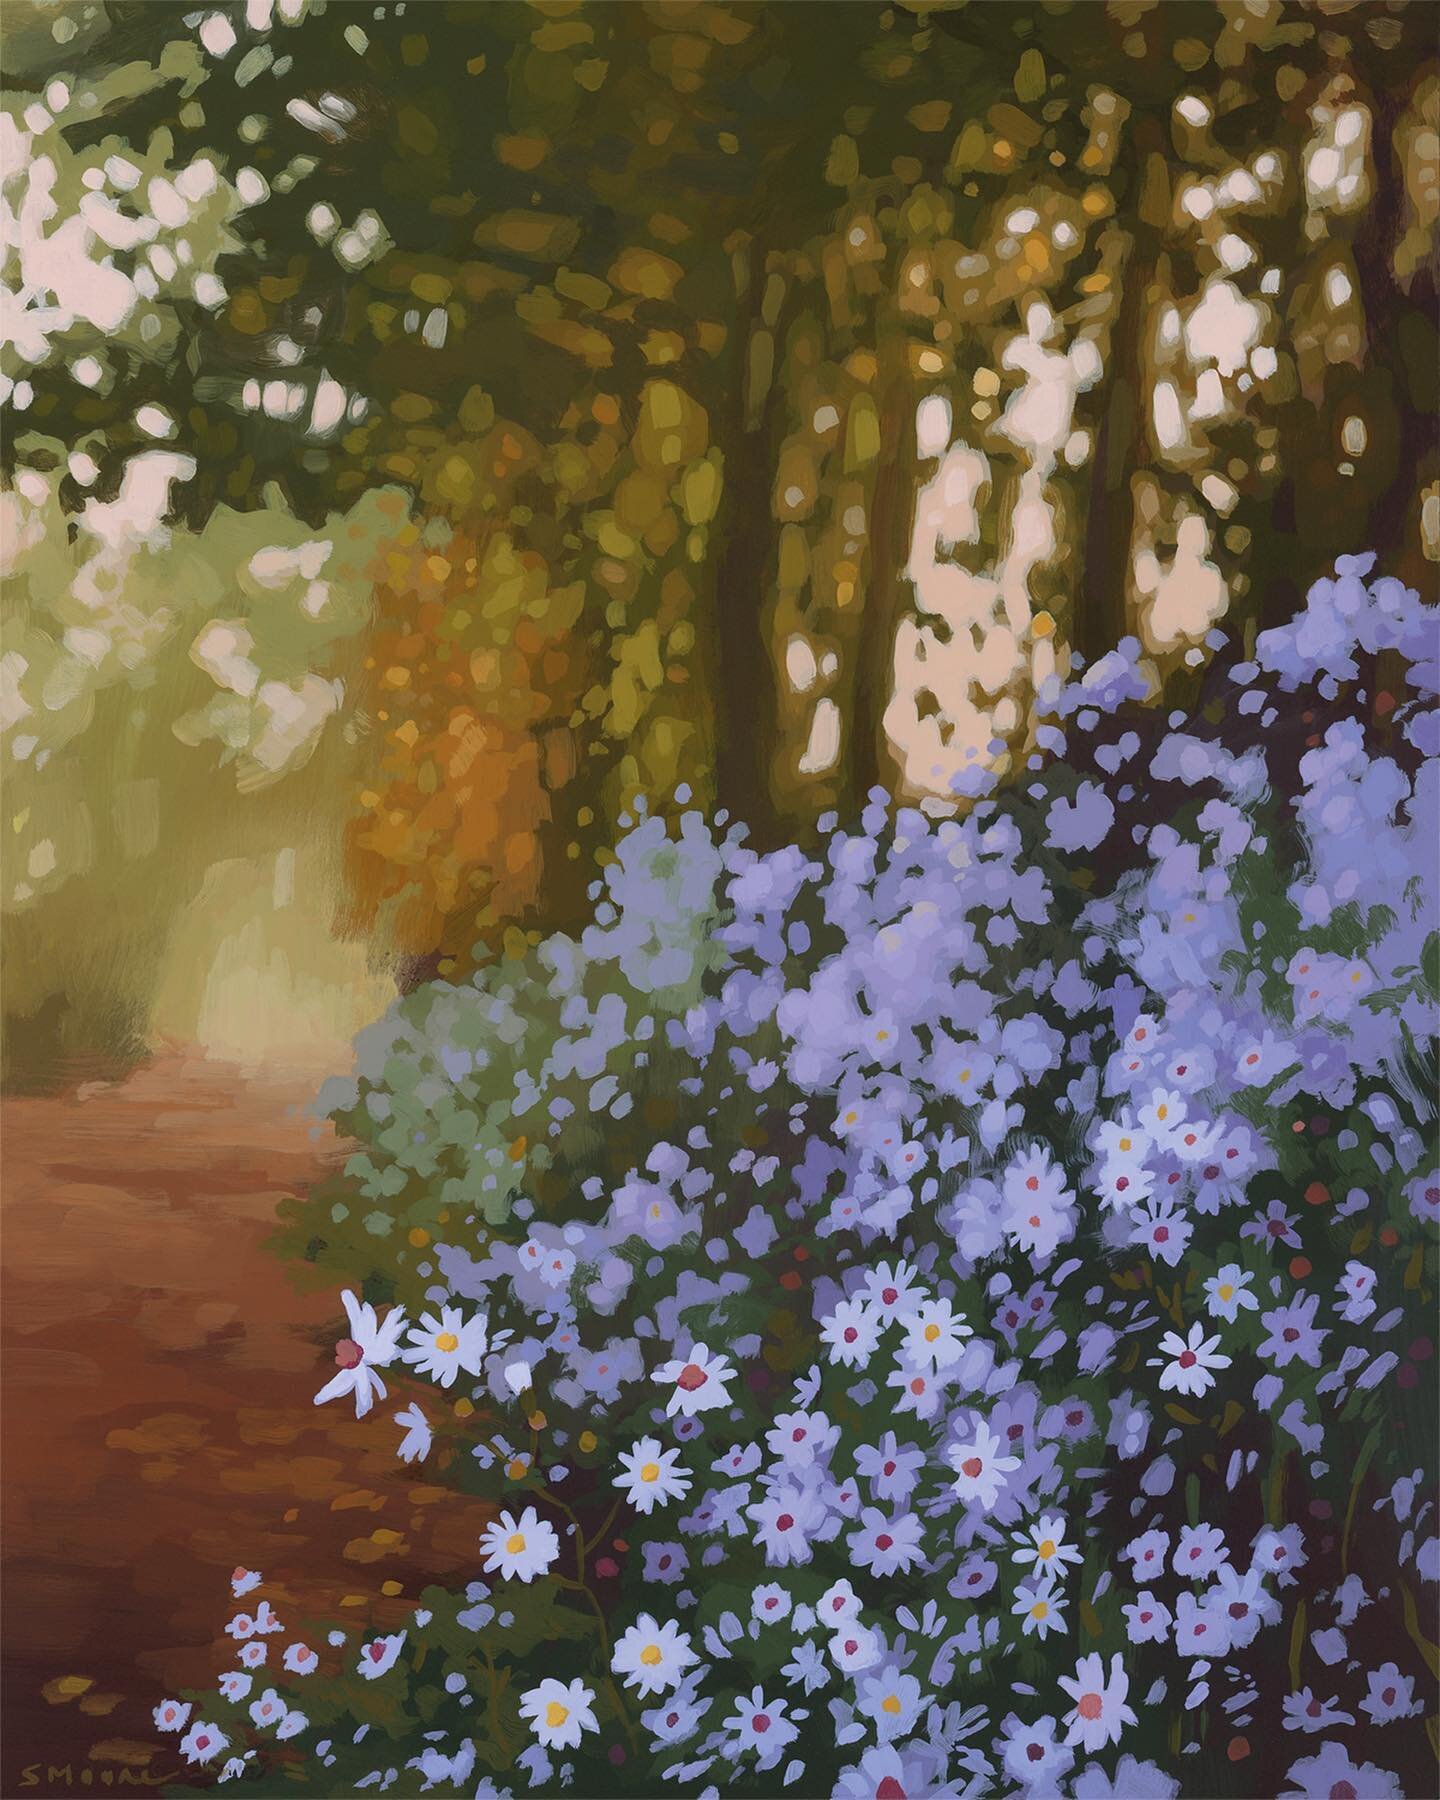 🍂 October 🍂

Azure Asters
Acrylic on panel
10 x 8&rdquo;

Gicl&eacute;e prints of this painting are available in my shop, with two size options! Rich archival inks on velvety Hahnem&uuml;hle paper&hellip; a year after making this painting, I&rsquo;